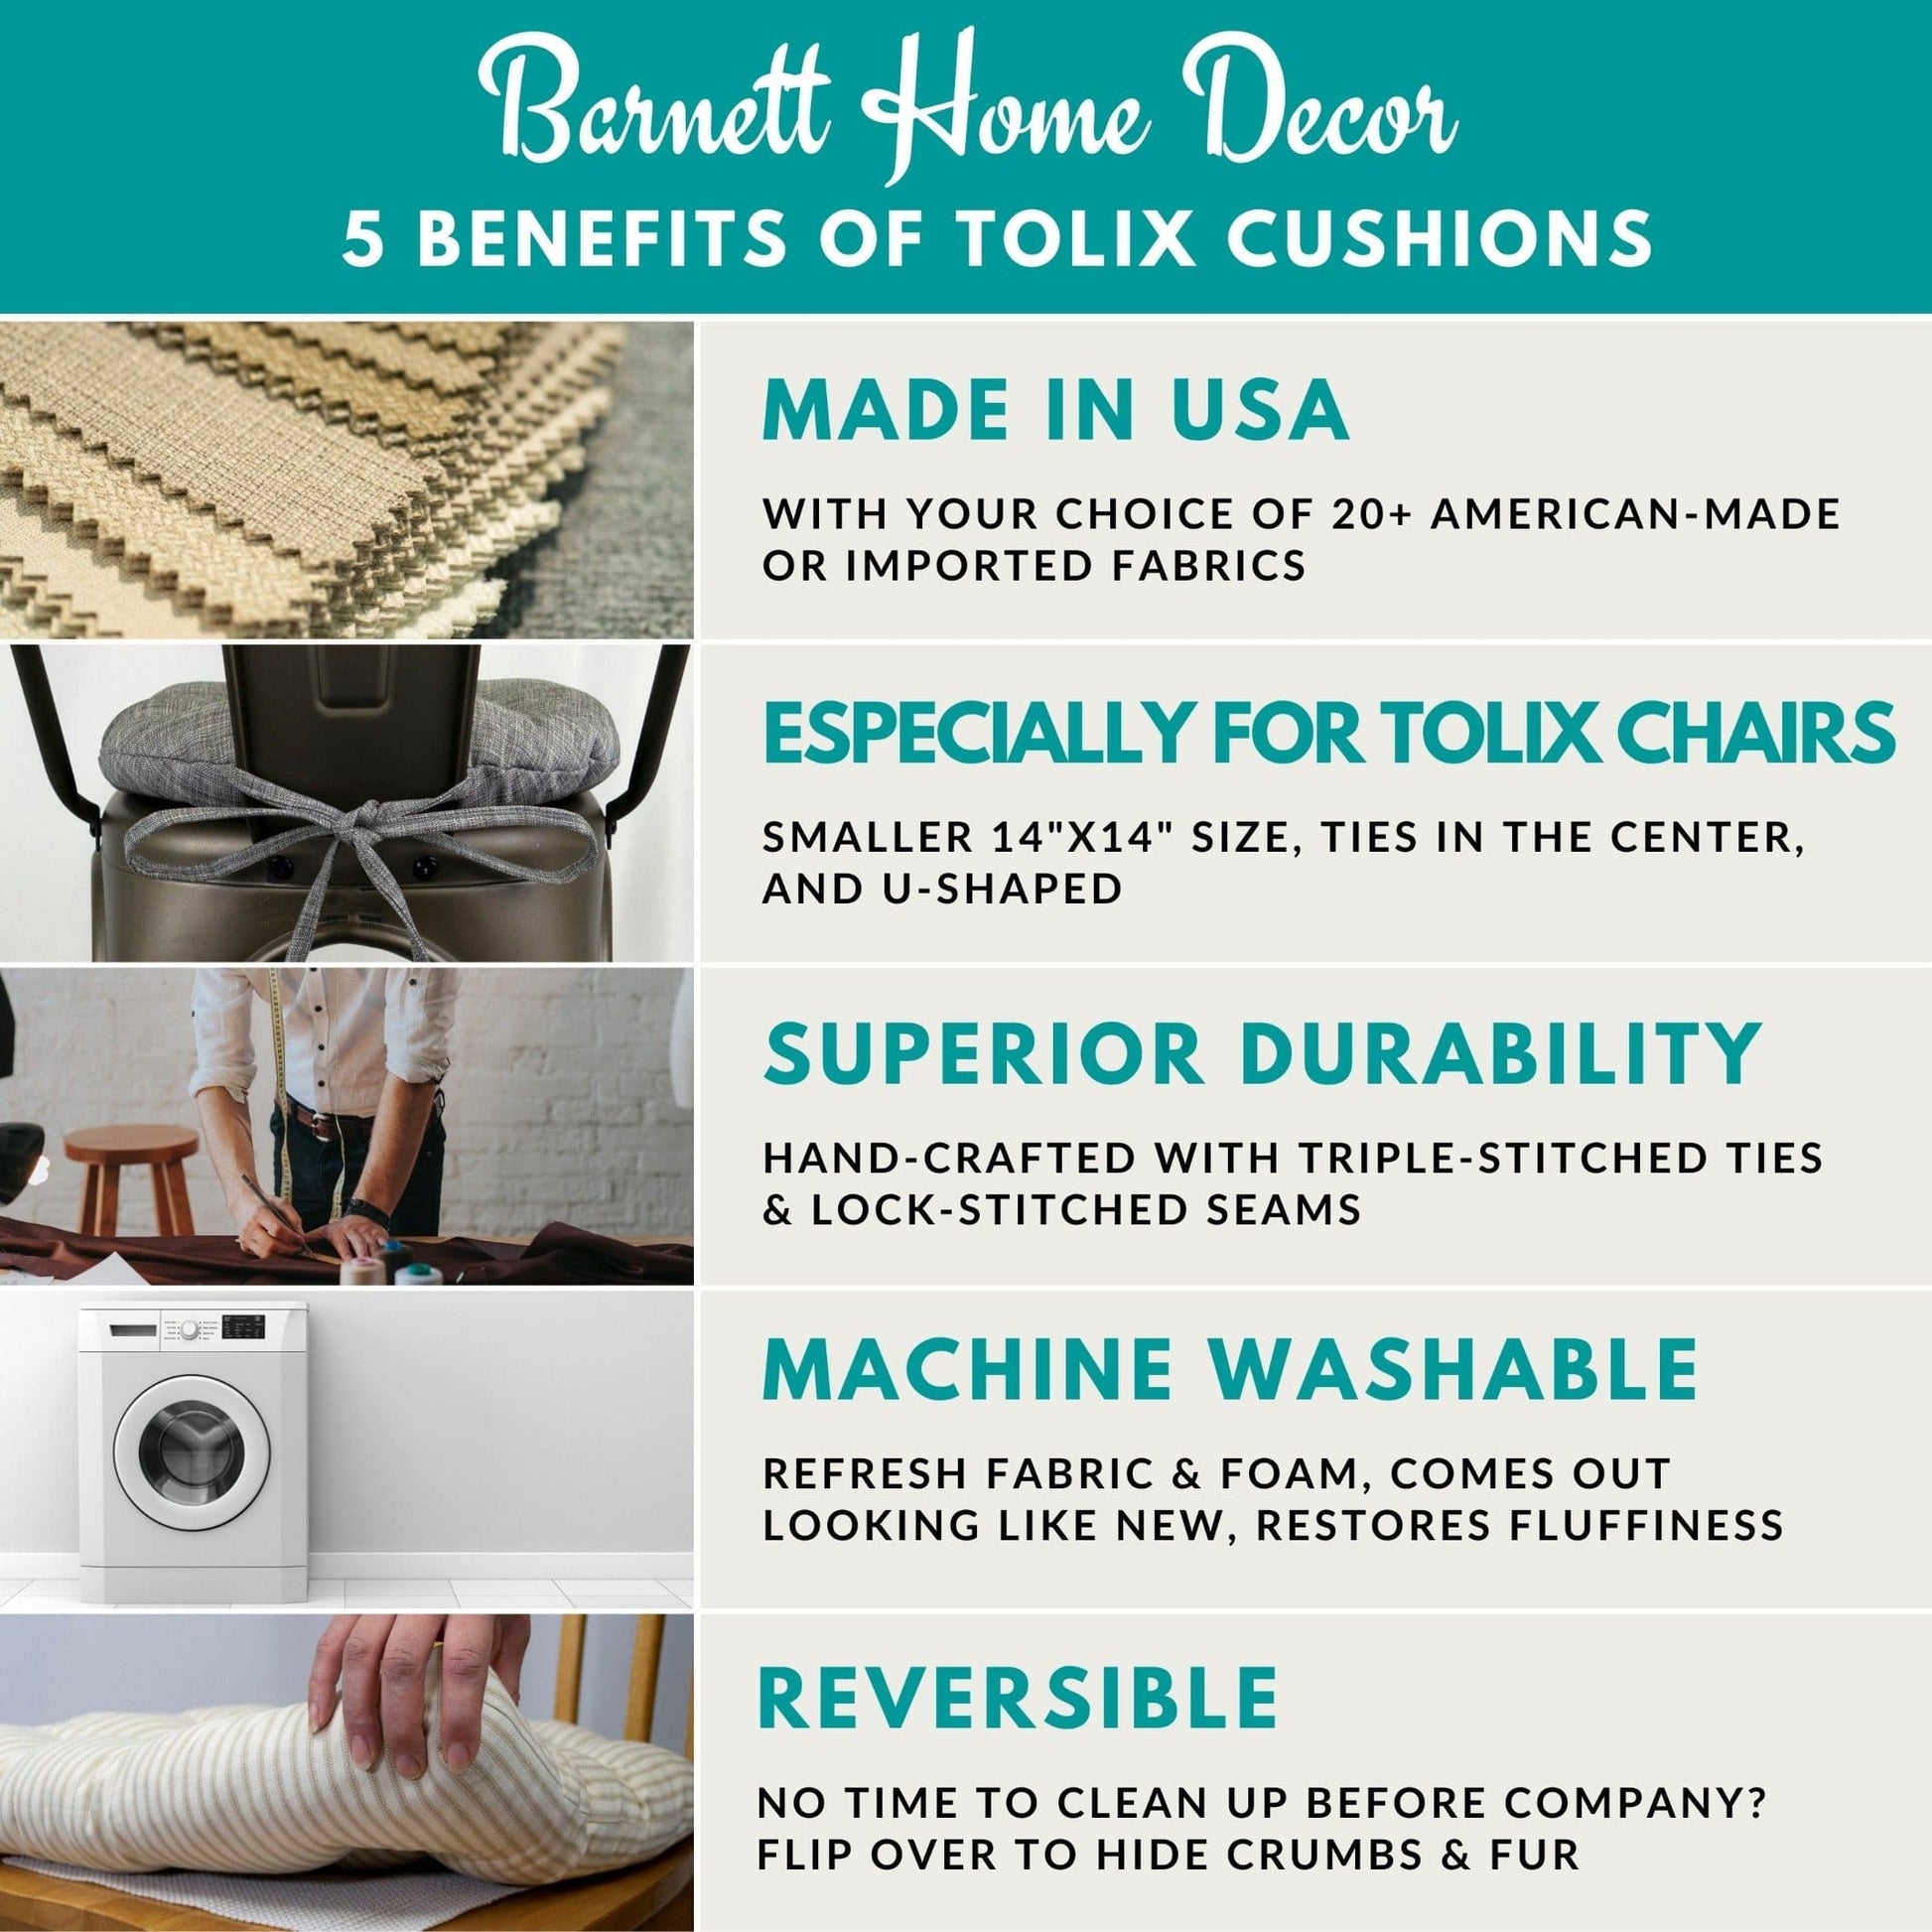 Barnett Home Decor Benefits of Tolix Cushions, Made in USA, Made for Tolix Chairs, Superior Durability, Machine Washable, Reversible 